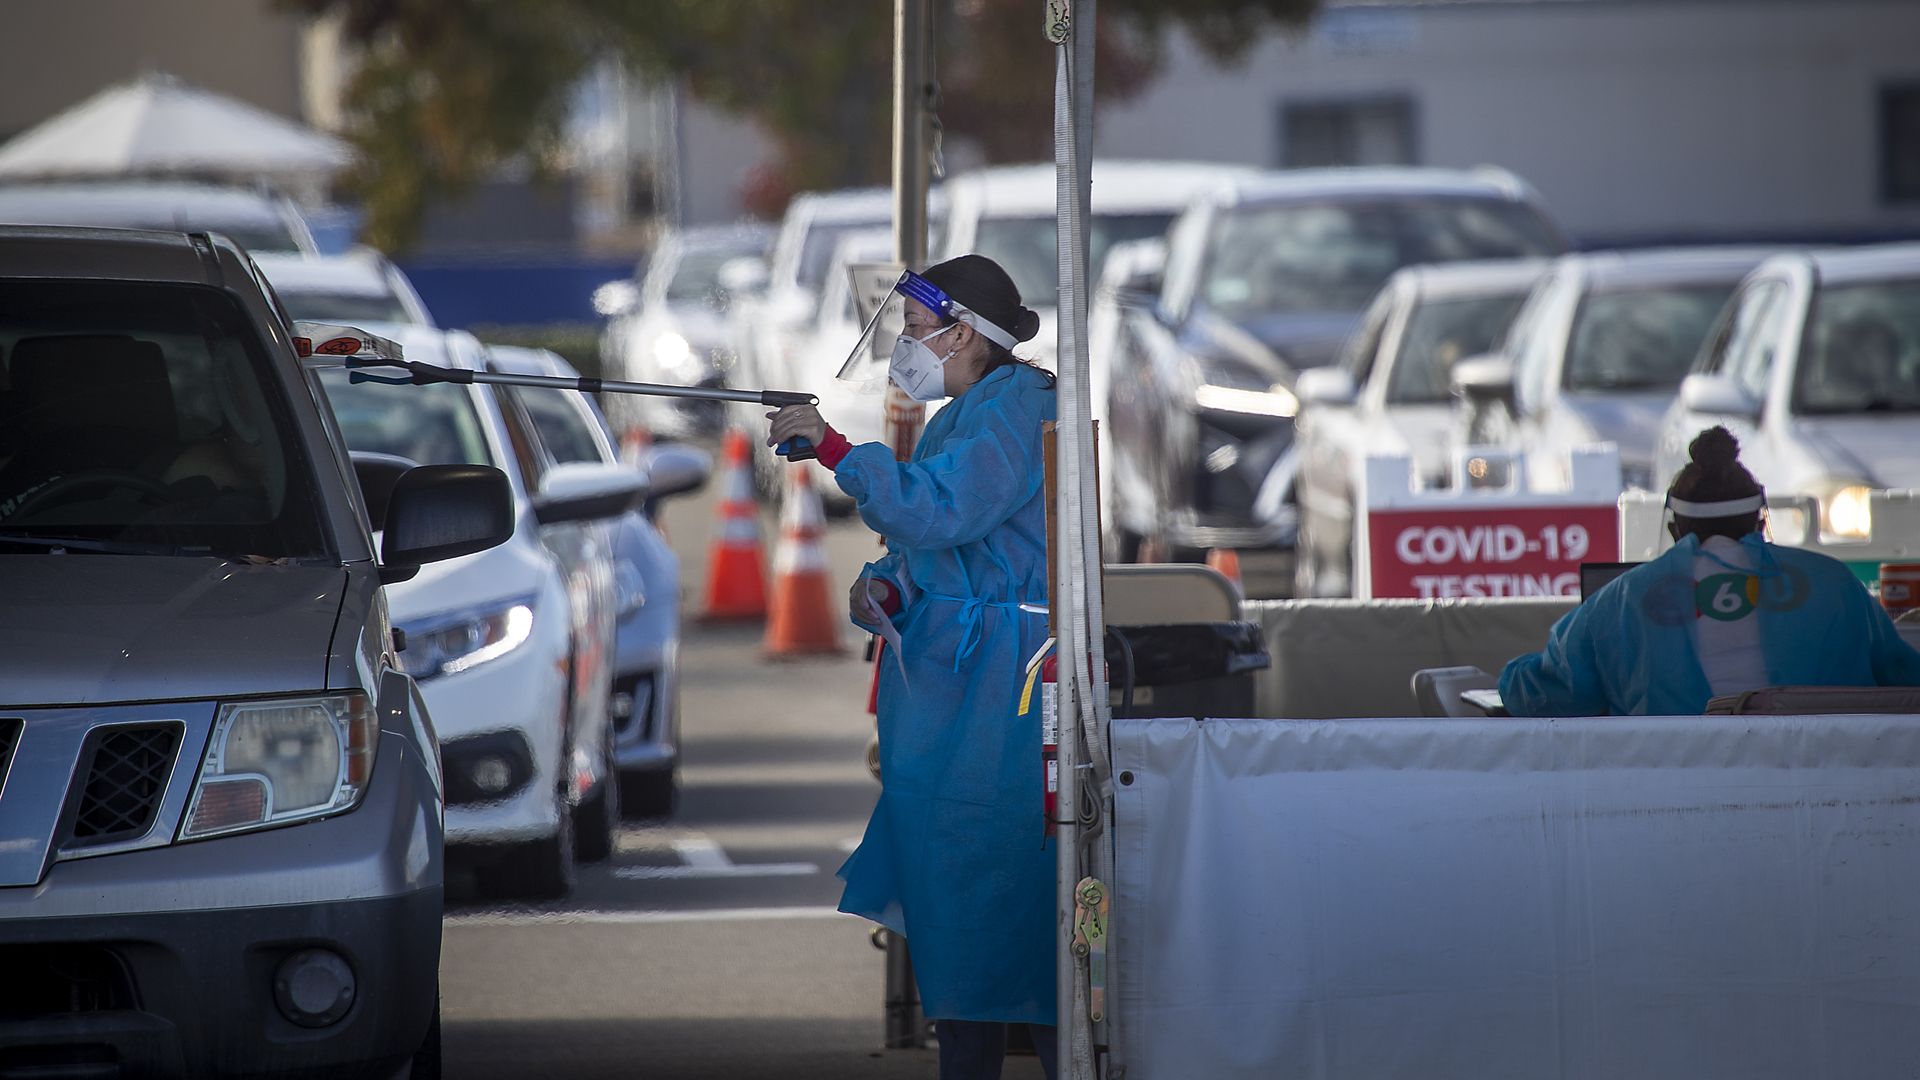 Clinic health care workers working with the Orange County Health Care Agency and city of Costa Mesa conducts testing at the drive-through self-administered COVID-19 testing super site in Orange County